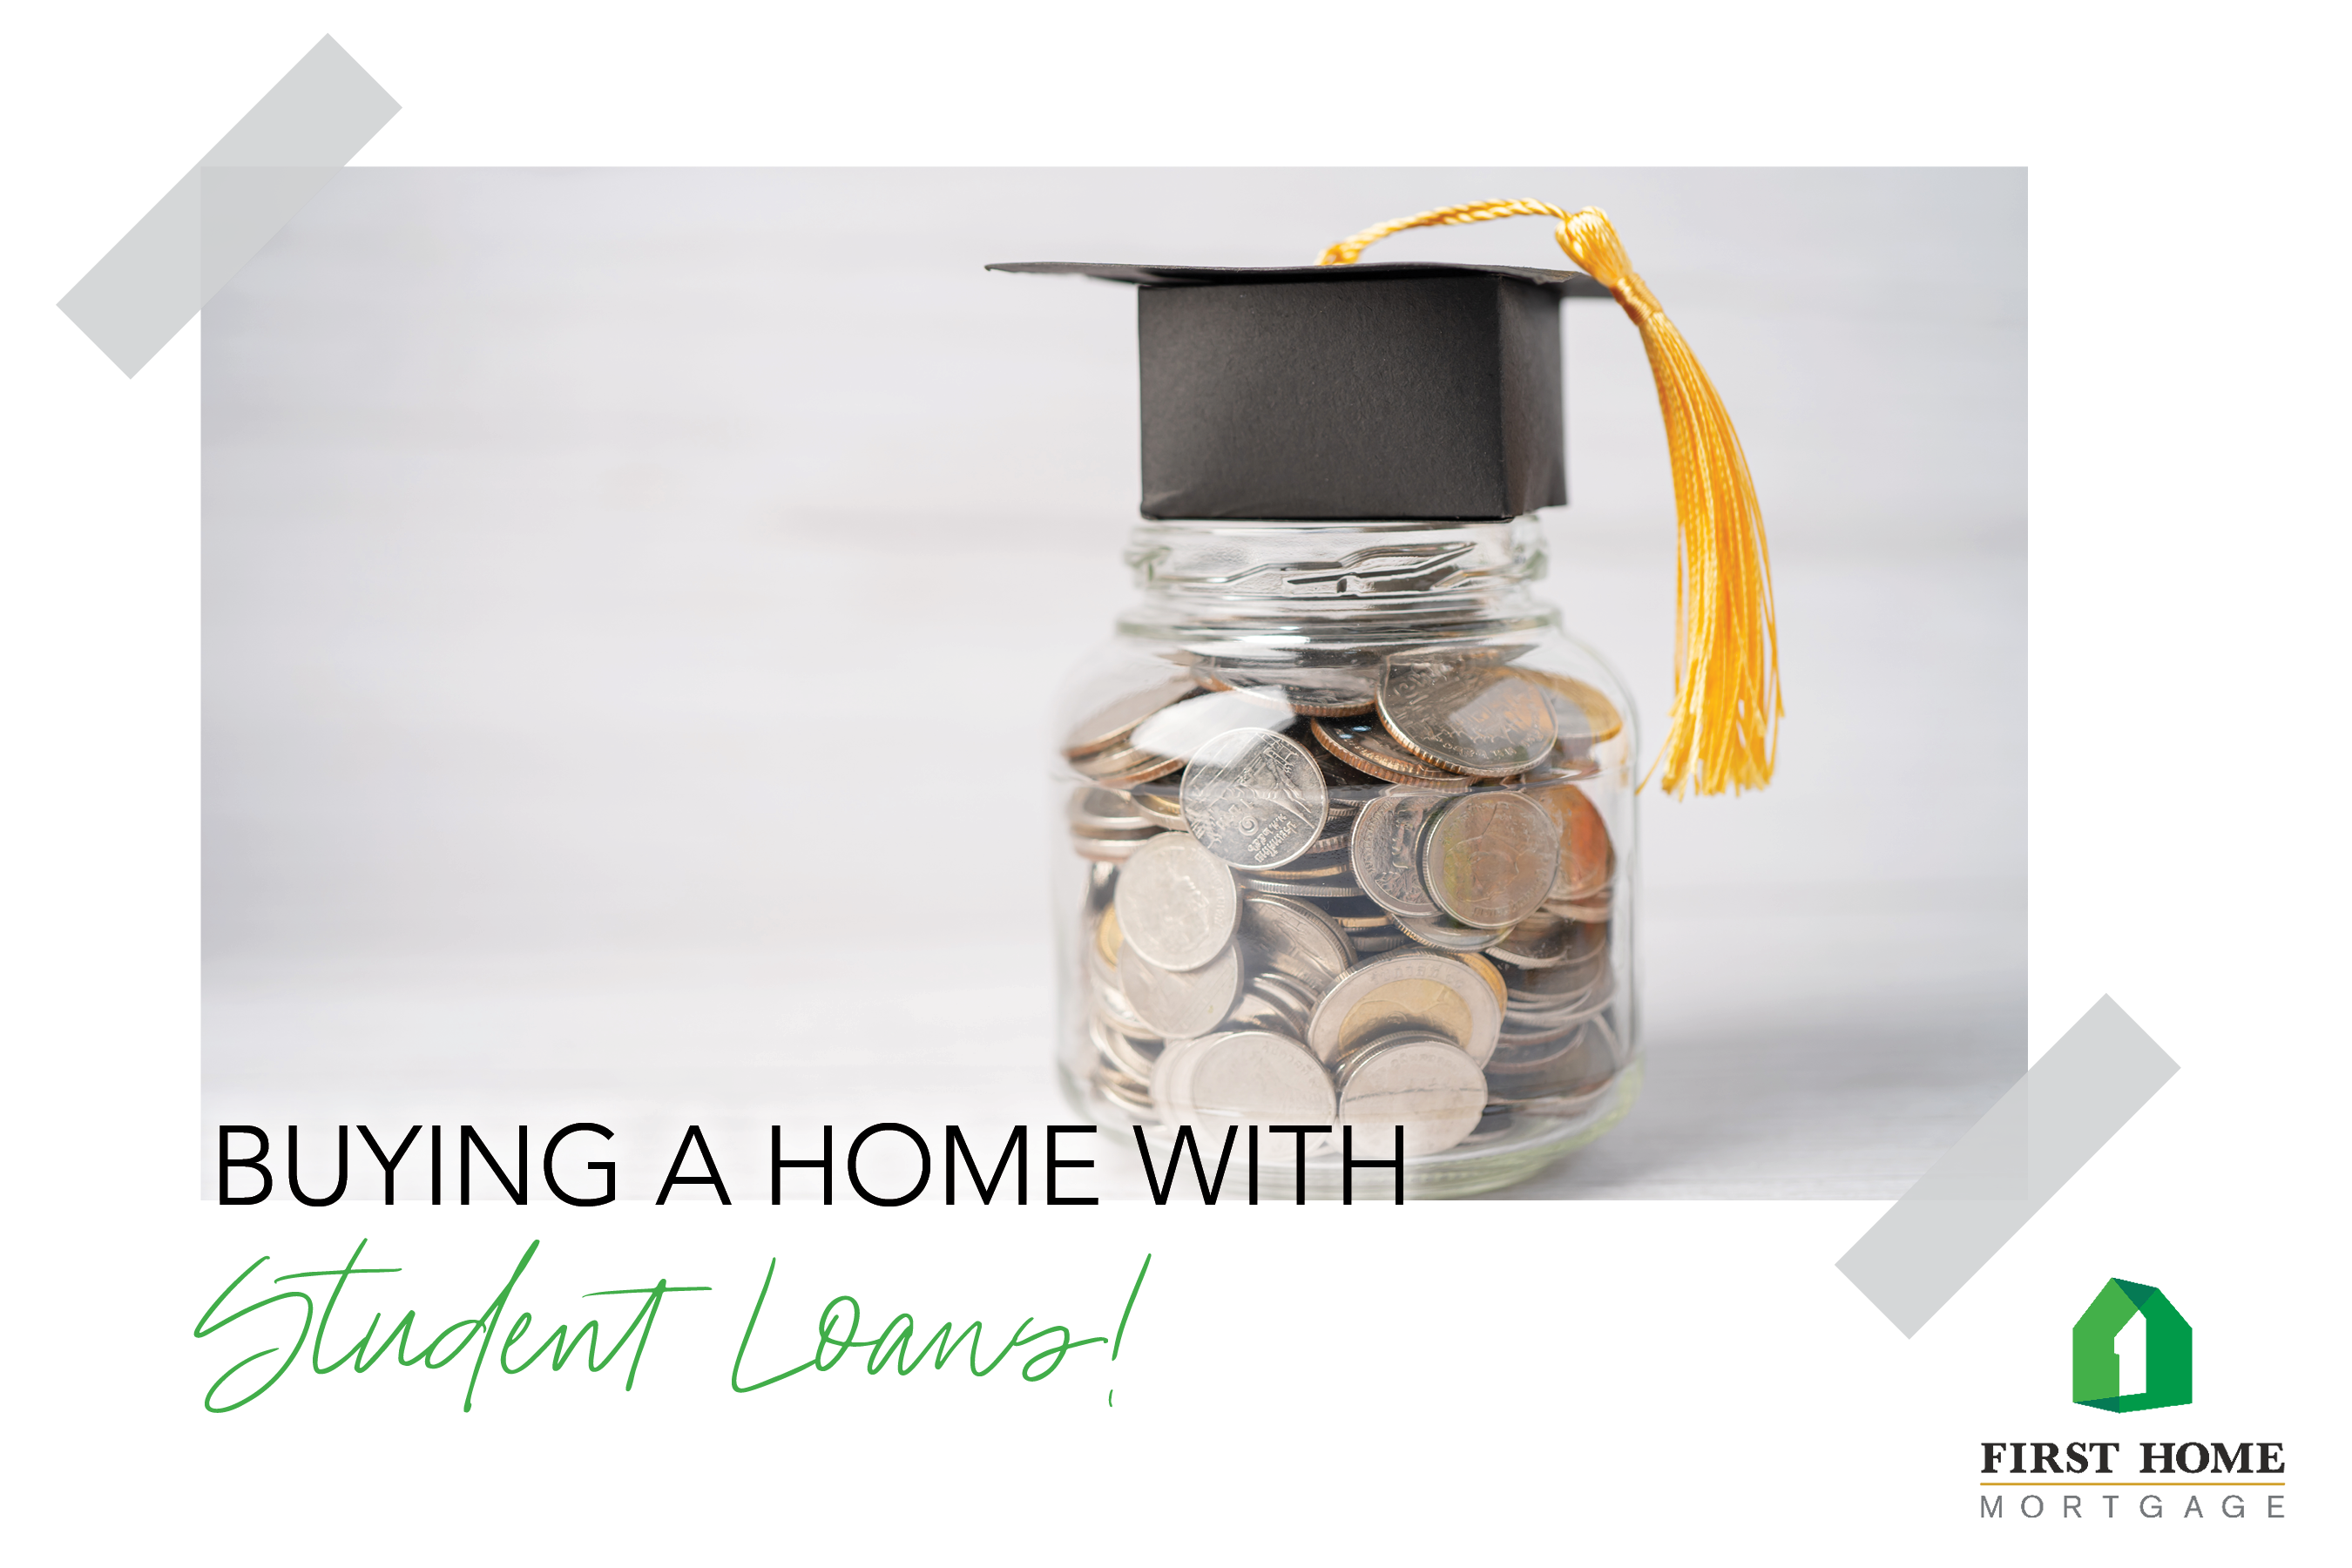 Buying a Home When You Have Student Loans: Don’t Let Debt Be a Dealbreaker